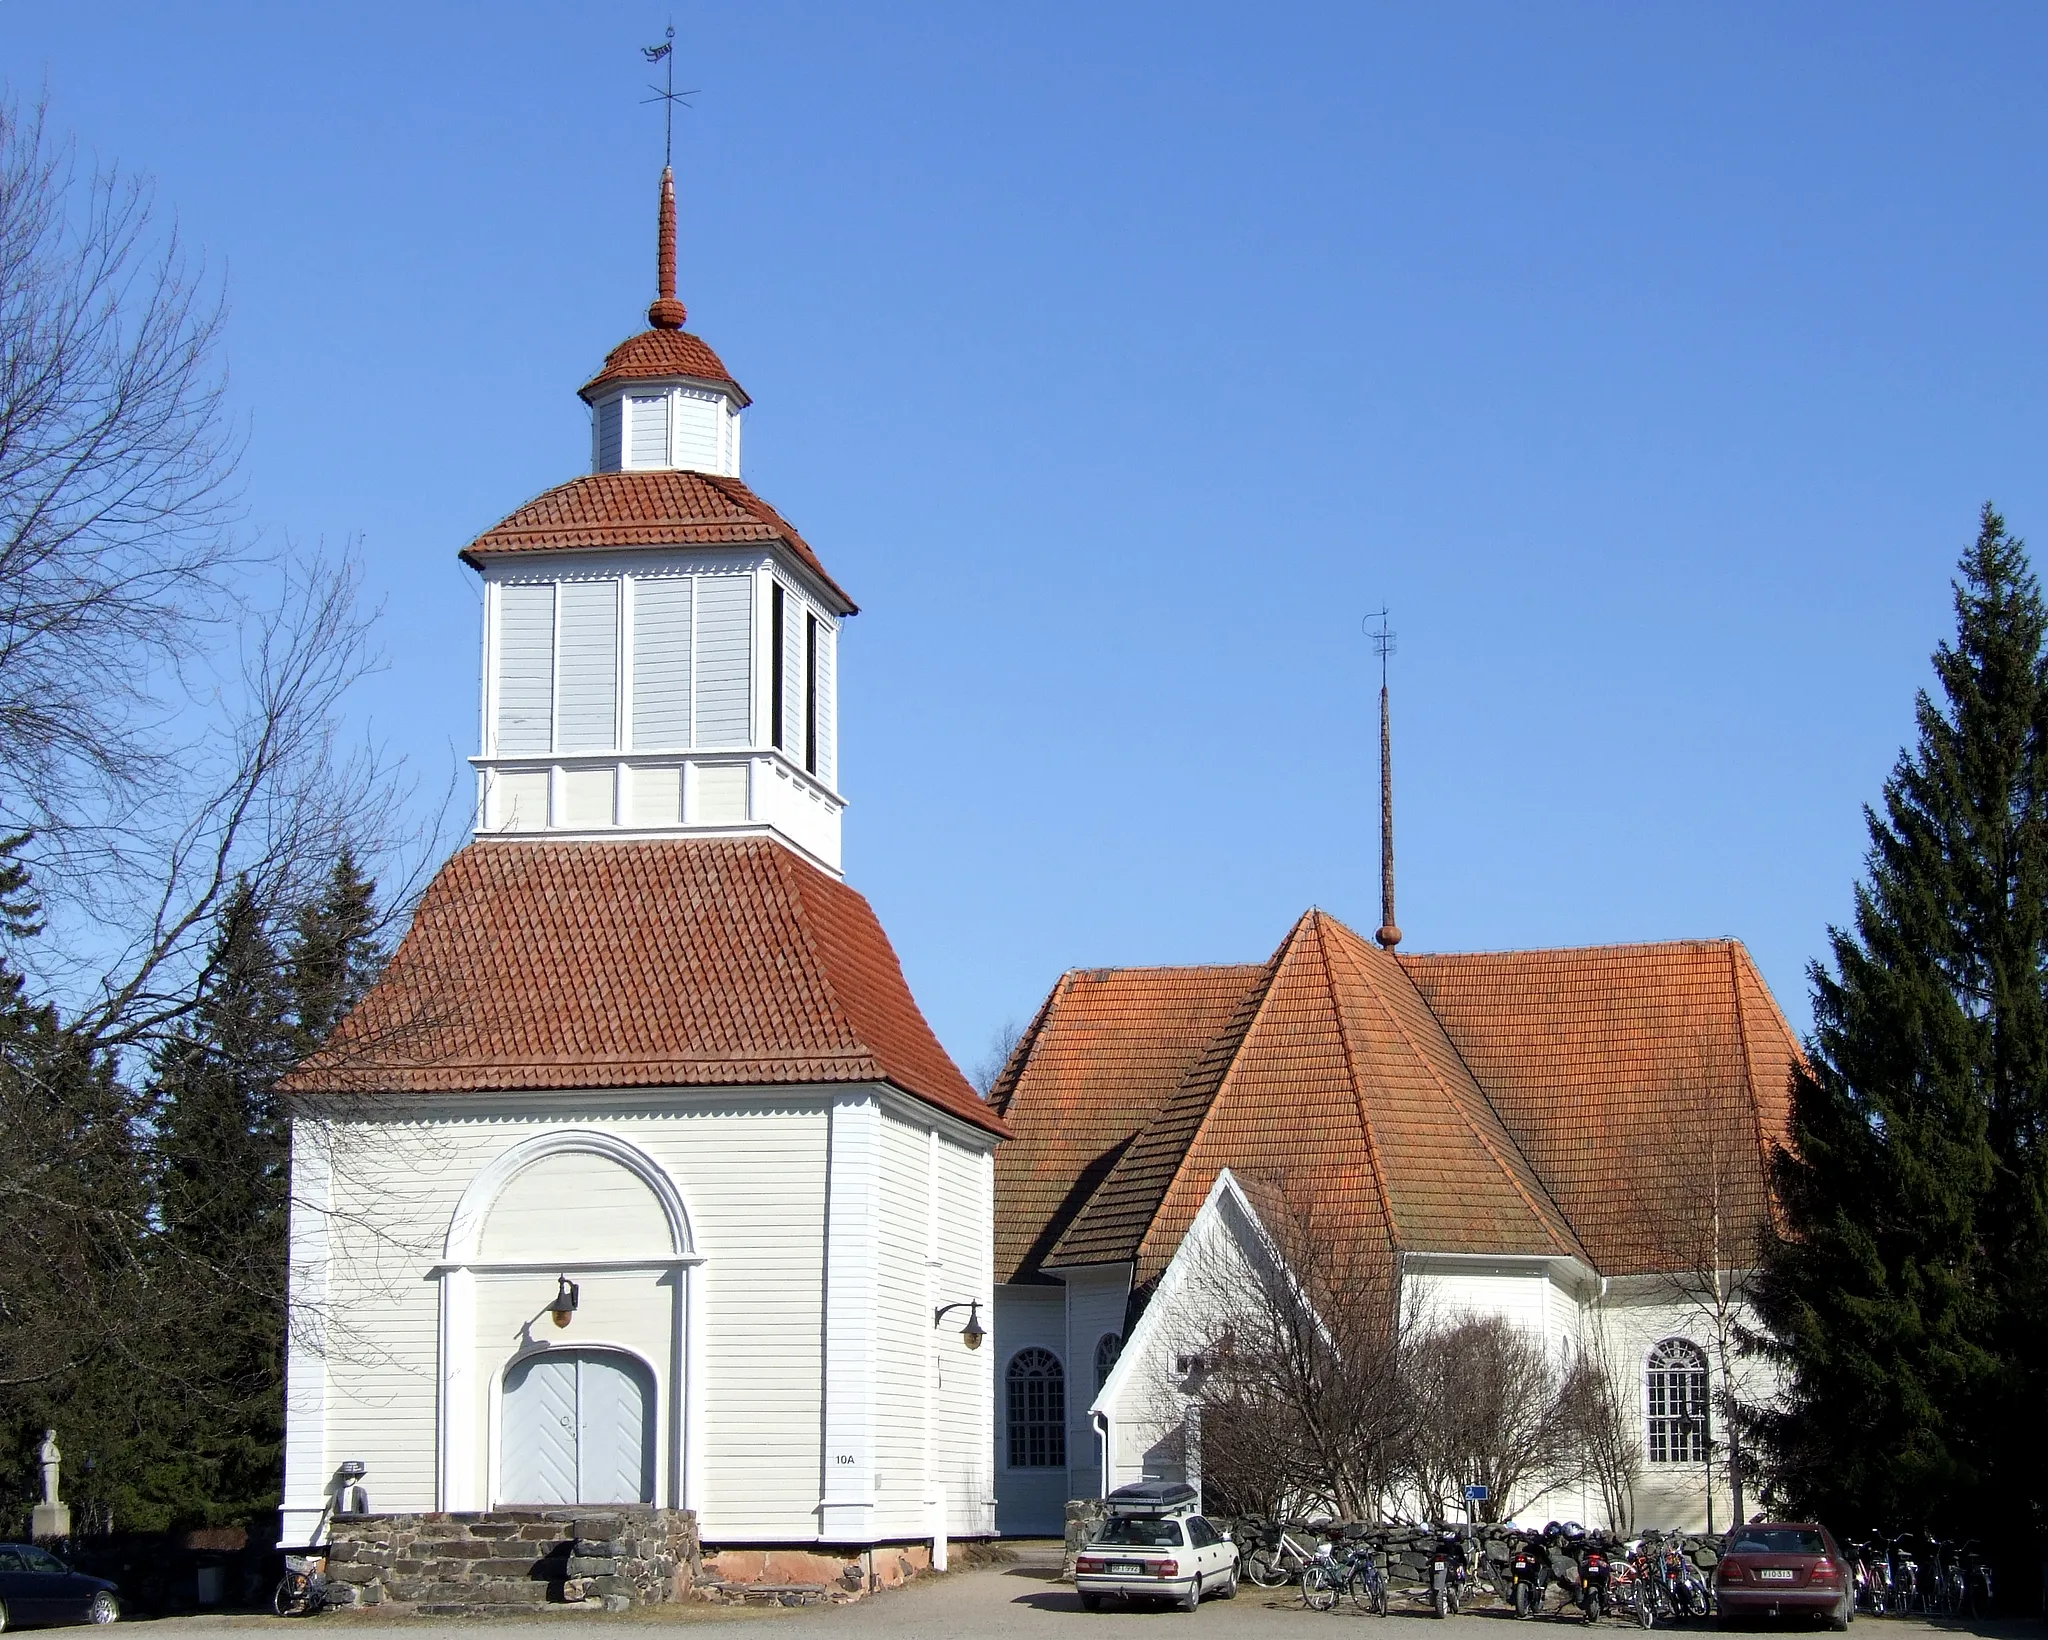 Photo showing: The Church and the Belfry of Haukipudas, Finland. The church is designed by Matti Honka and built by Jaakko Suonperä and it was completed in the year 1762. The belfry is designed and built by Heikki Väänänen in 1751.